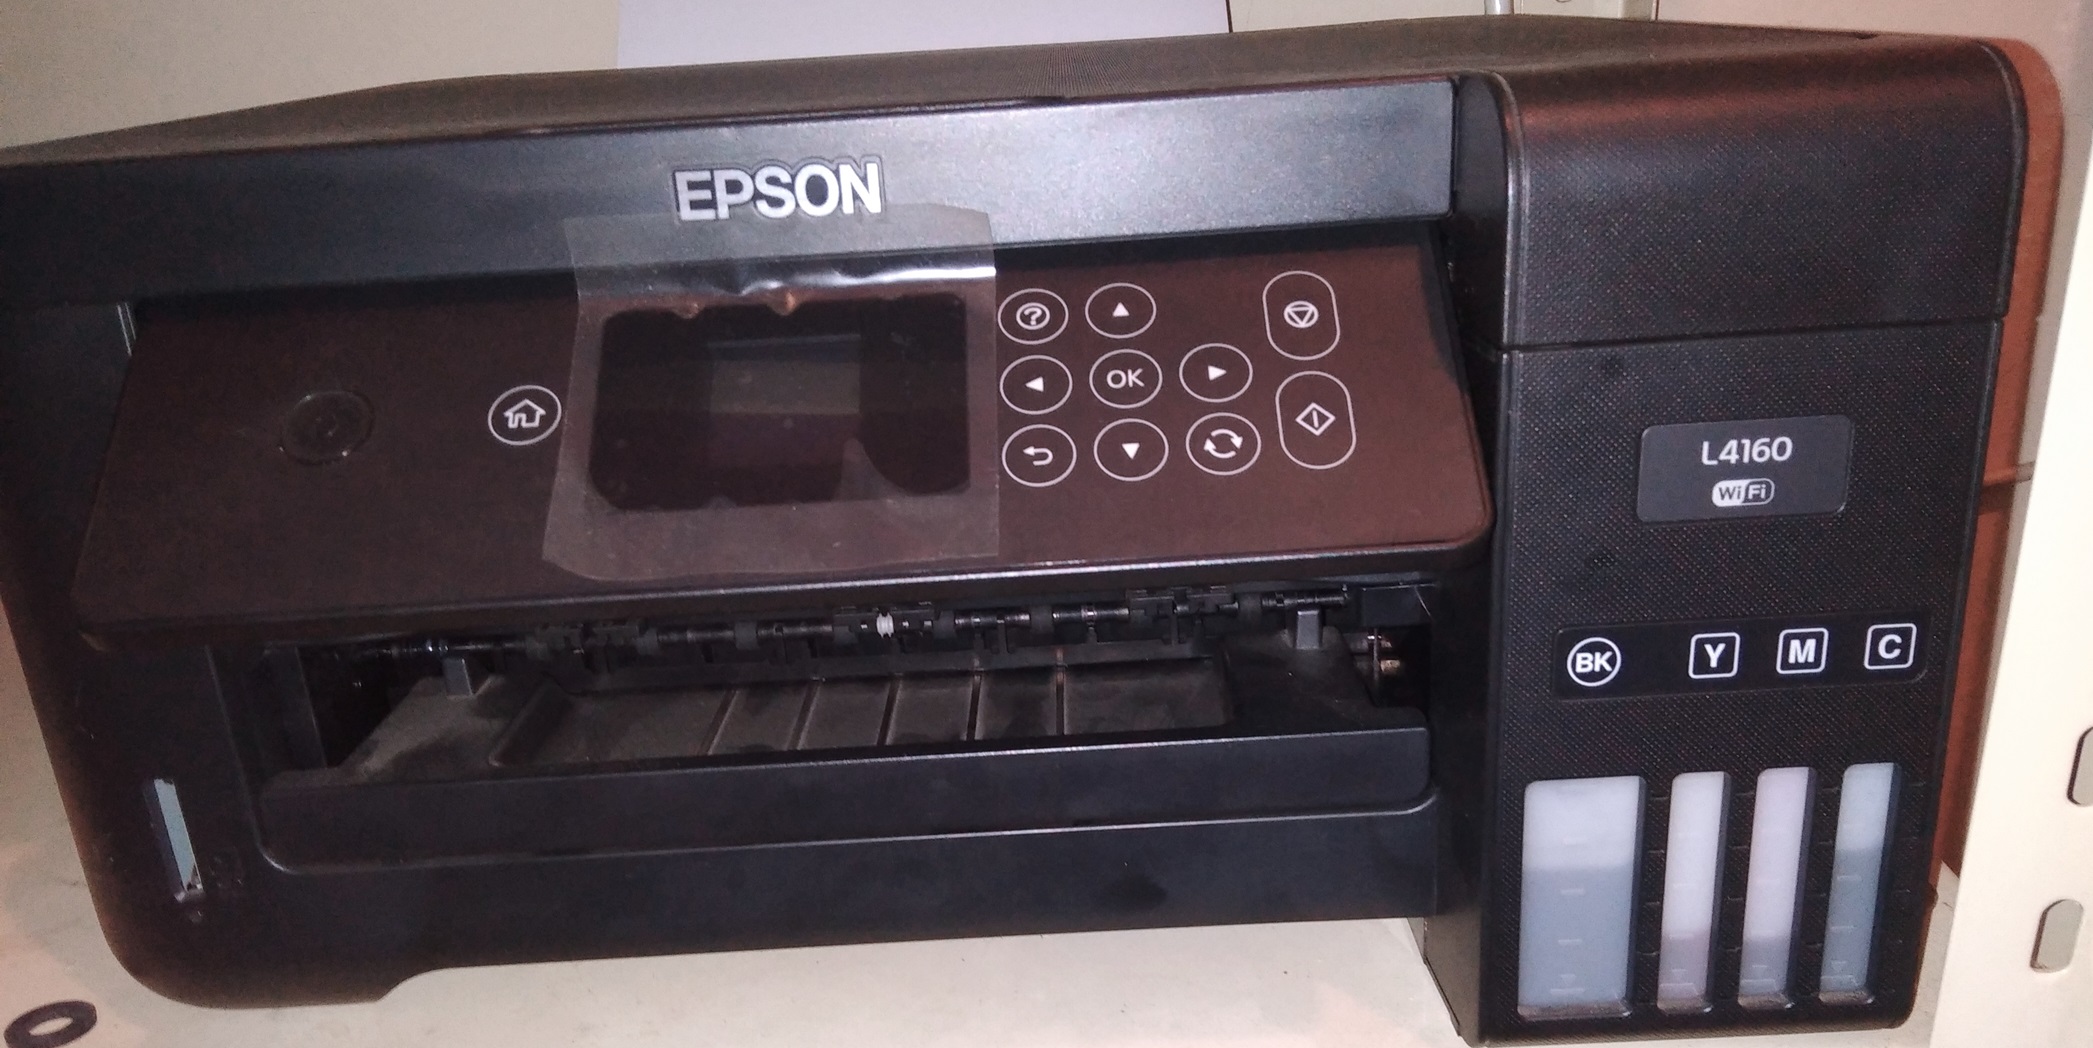 Epson EcoTank L4160 multifunction printer (SCAN,PRINT,COPY) for sale - as new with original packing